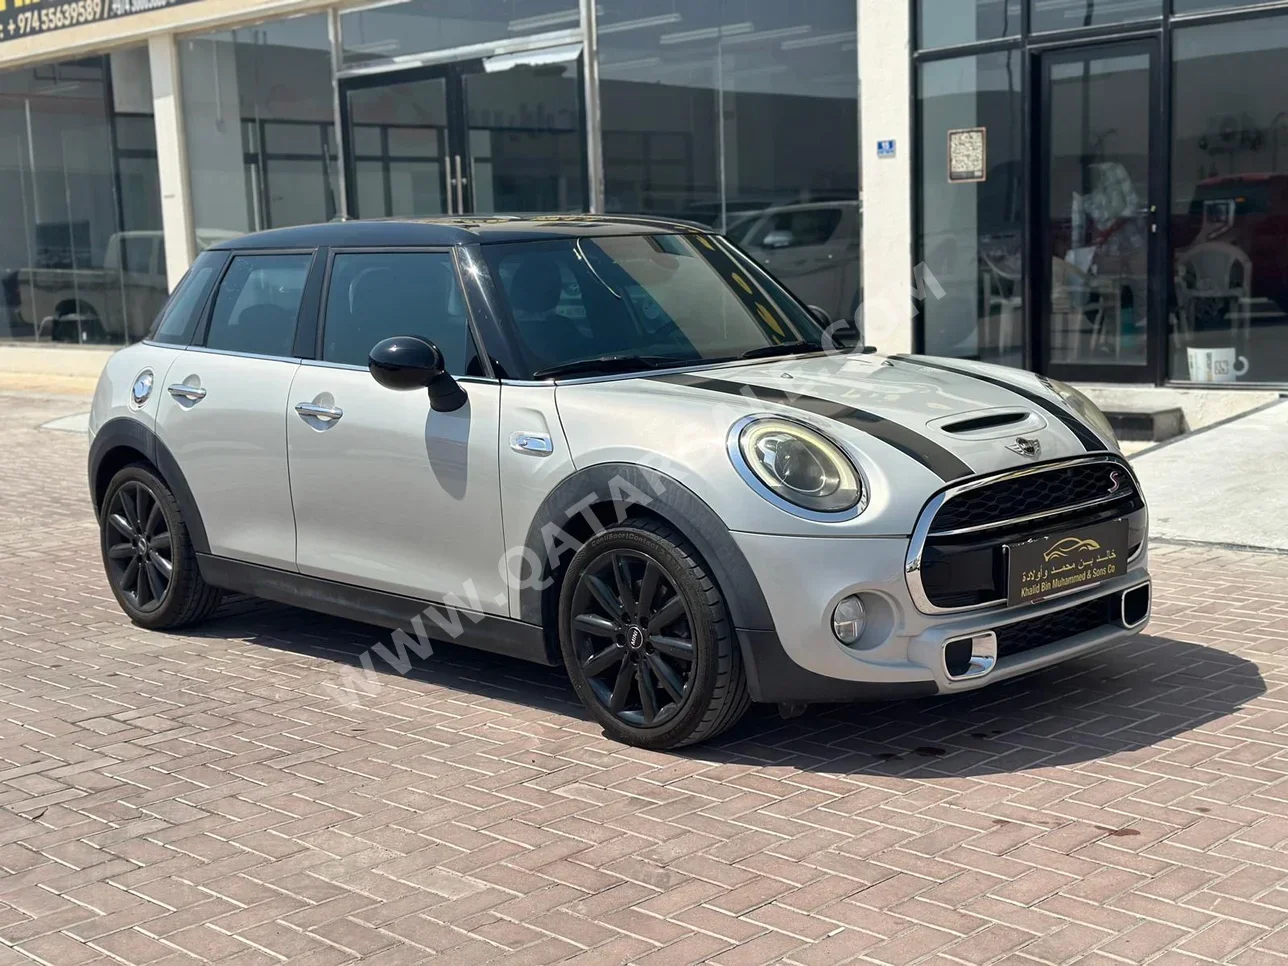 Mini  Cooper  S  2018  Automatic  107,000 Km  4 Cylinder  Front Wheel Drive (FWD)  Hatchback  White